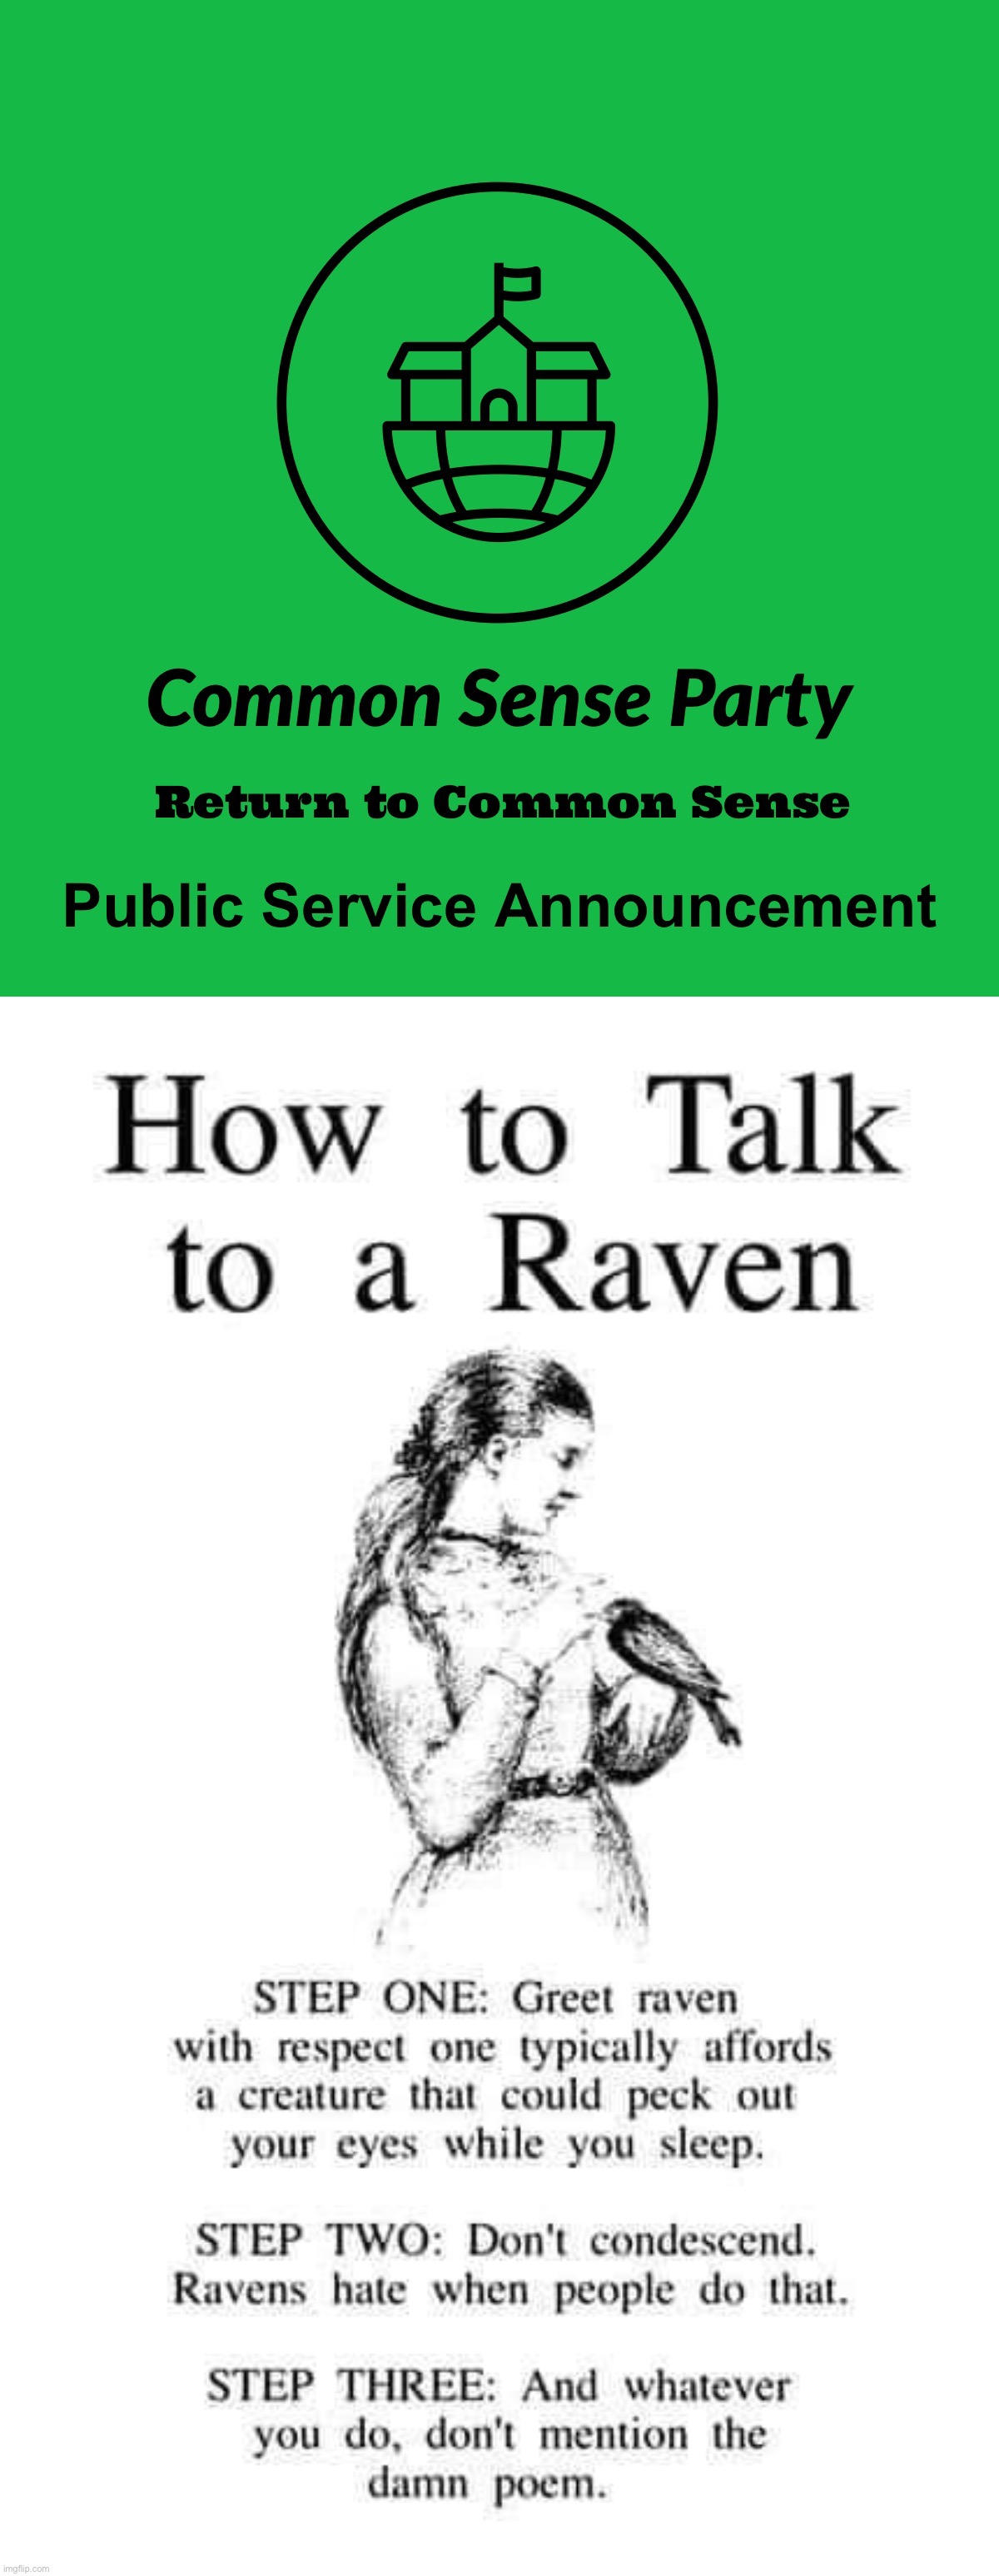 This will help you maintain etiquette in most raven-related situations. | image tagged in csp public service announcement,how to talk to a raven,how,to,maintain,etiquette | made w/ Imgflip meme maker